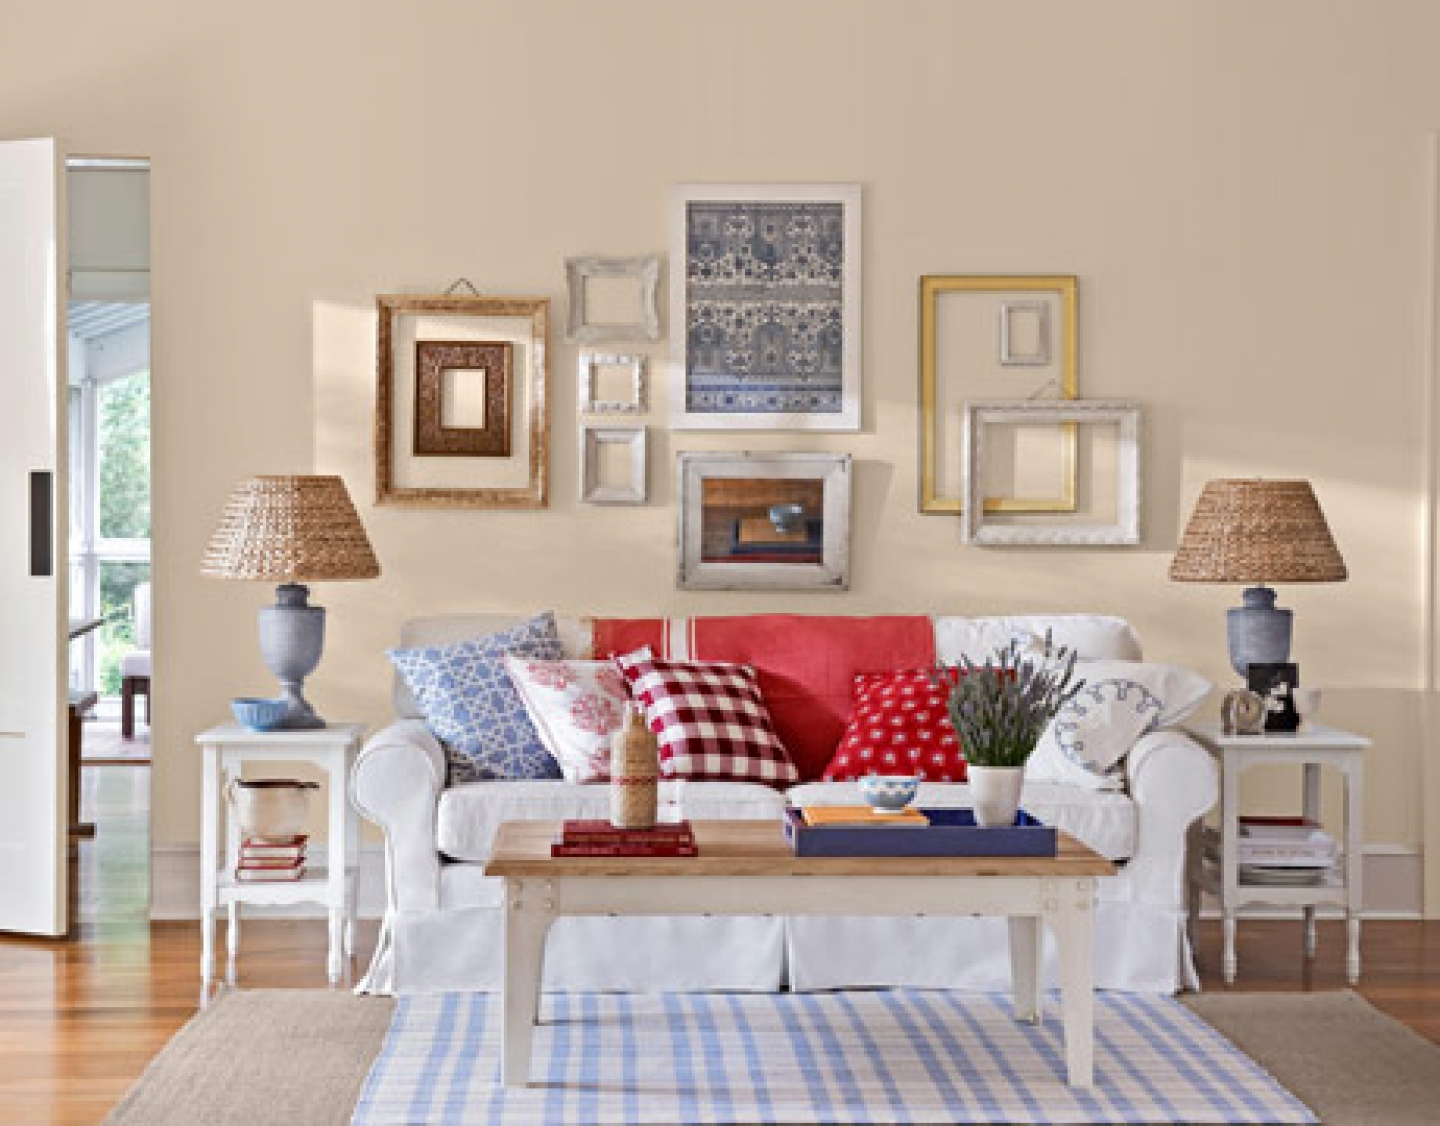 Wall Arts Wicker Chic Wall Arts Decor Also Wicker Lamp Shades Idea Feat Colorful Sofa Pillows And Narrow Coffee Table In Country Living Room Design Living Room  Country Living Room Appears Appealing Interior 